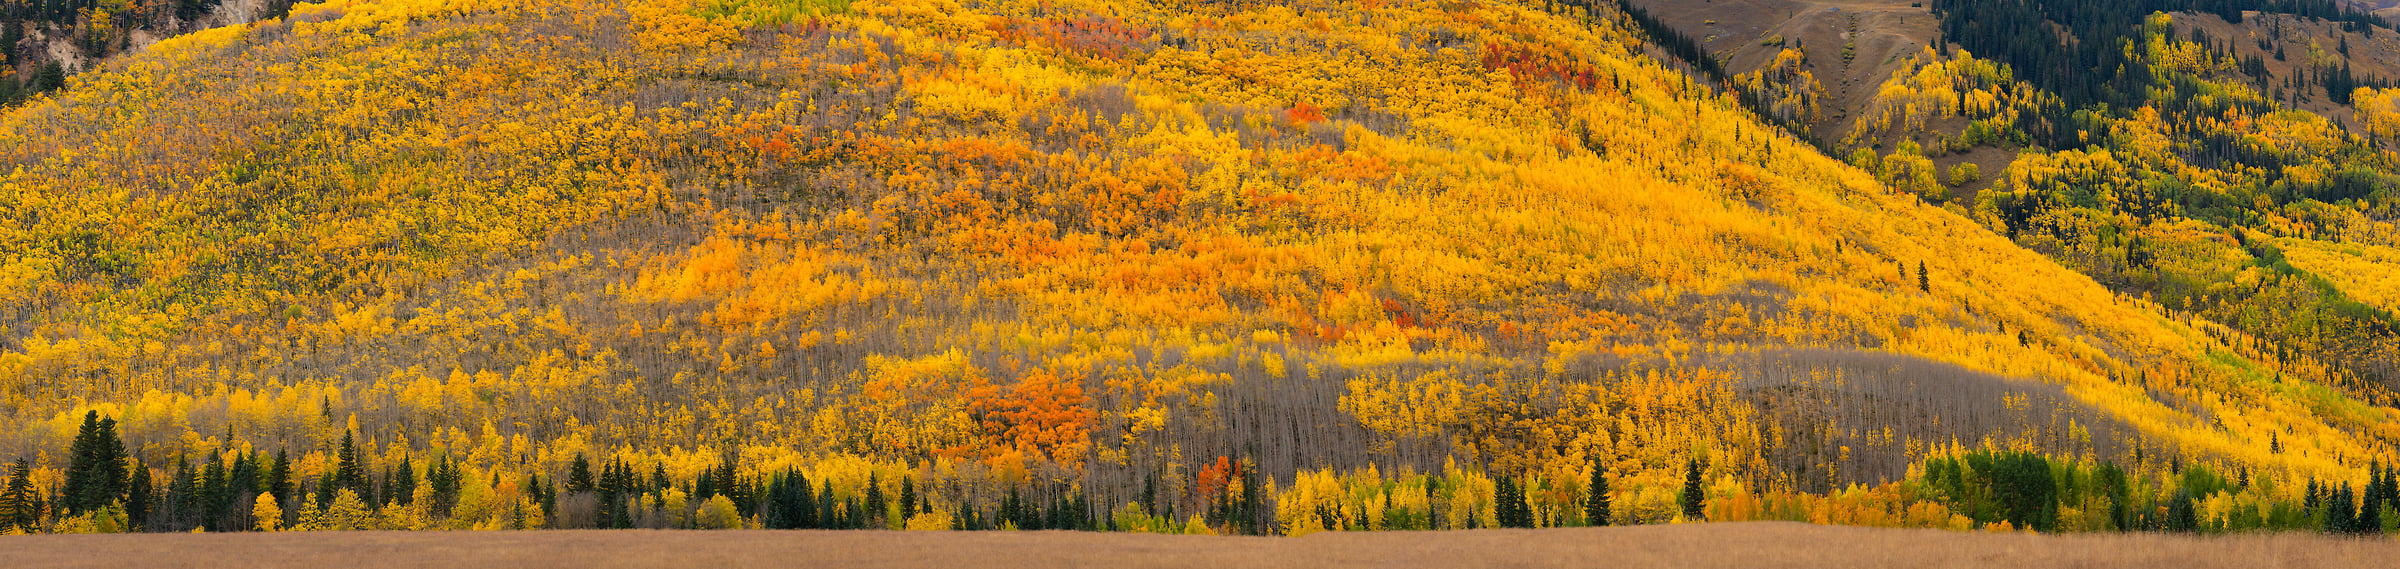 855 megapixels! A very high resolution, large-format VAST photo print of an aspen tree forest; landscape photograph created by Jeff Lewis in Ouray, Colorado.